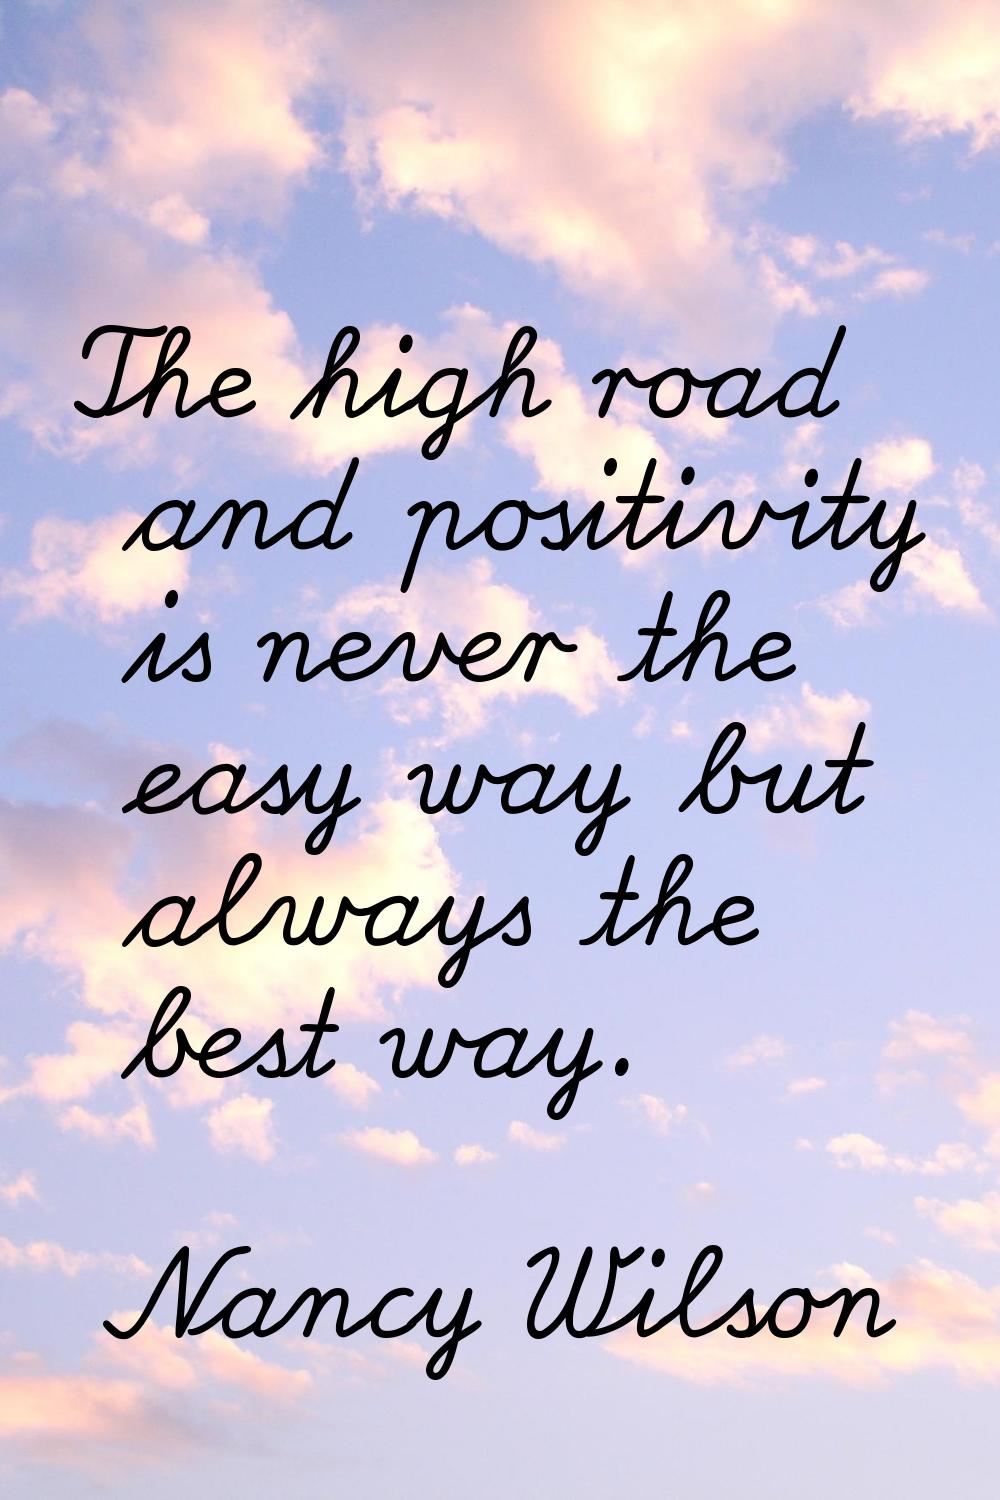 The high road and positivity is never the easy way but always the best way.